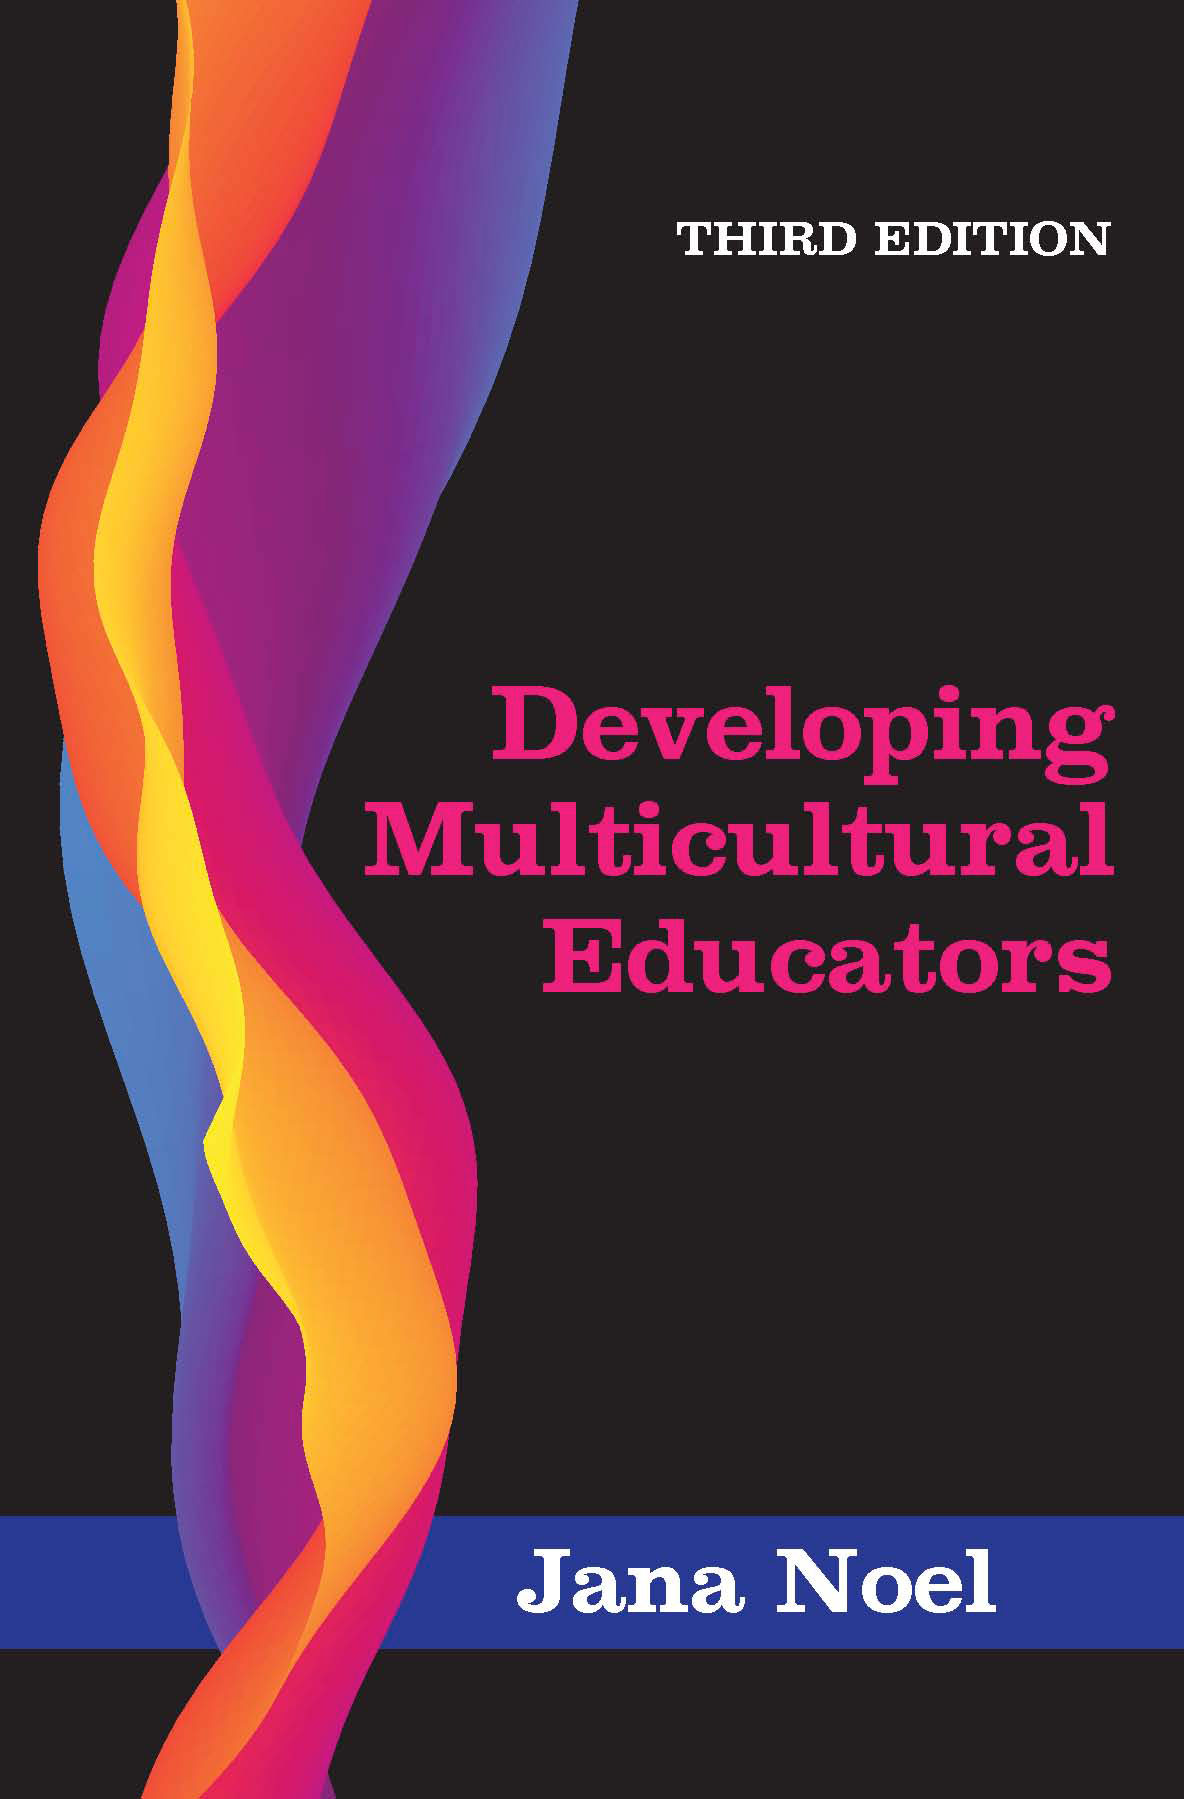 Developing Multicultural Educators: Third Edition by Jana  Noel